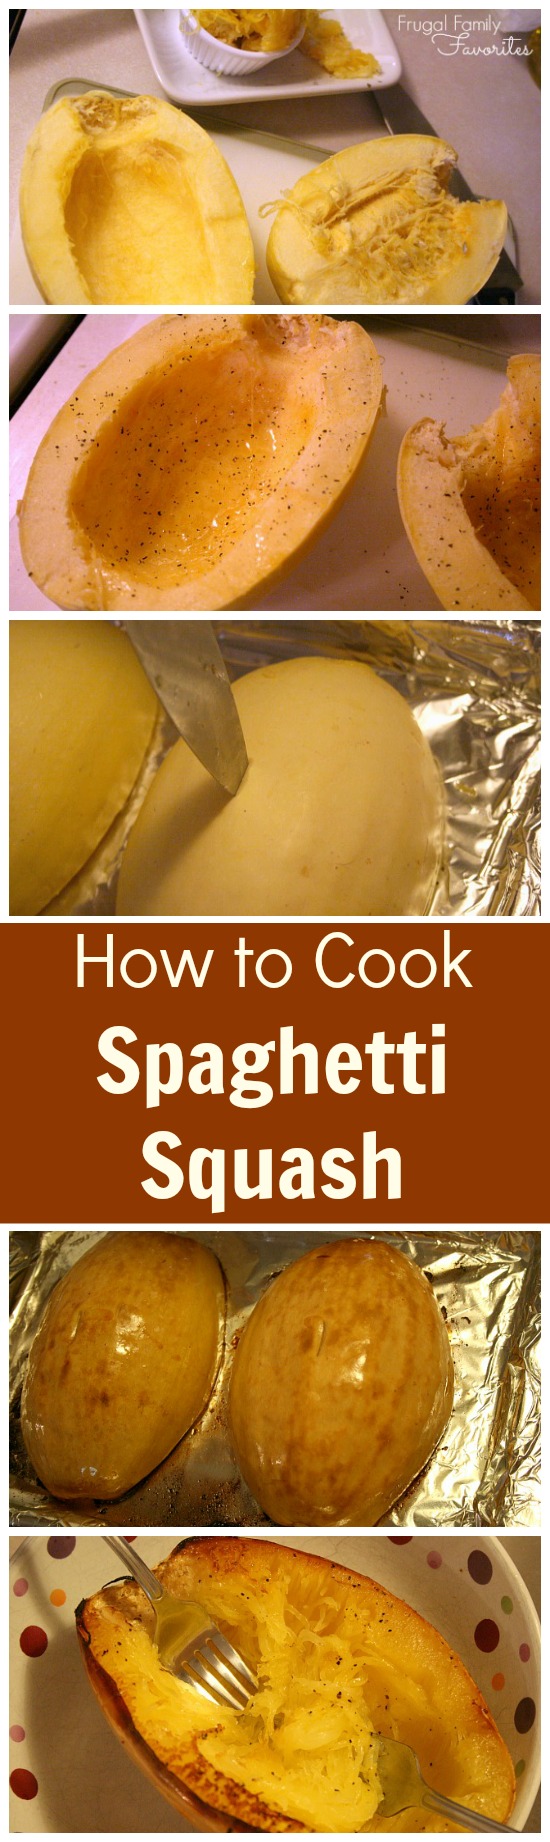 Delicious and so nutritious. Perfect for the low carb diet. Spaghetti squash is easy to bake and served with a hearty vegetarian spaghetti sauce... Yum!